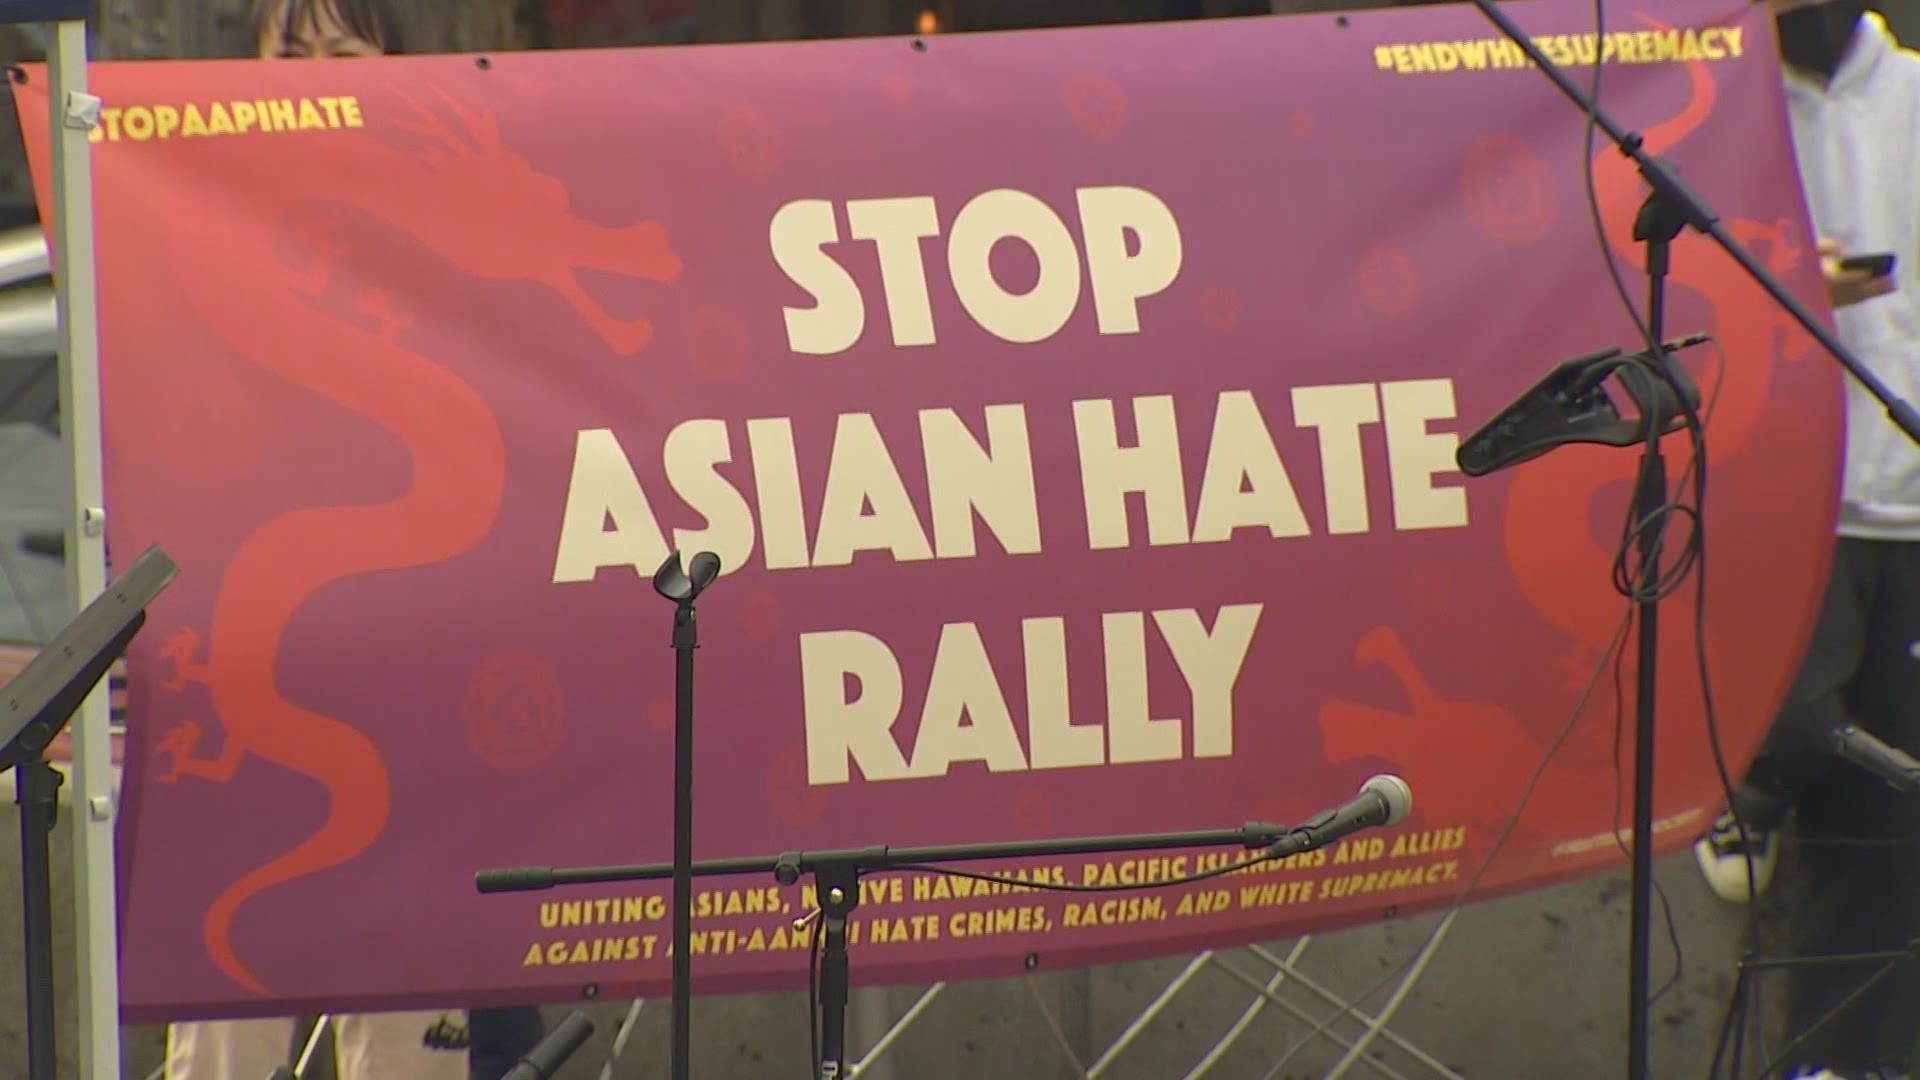 Organizers said they felt it was important not just to denounce Asian hate, but to celebrate all the good that comes from the Asian American community.